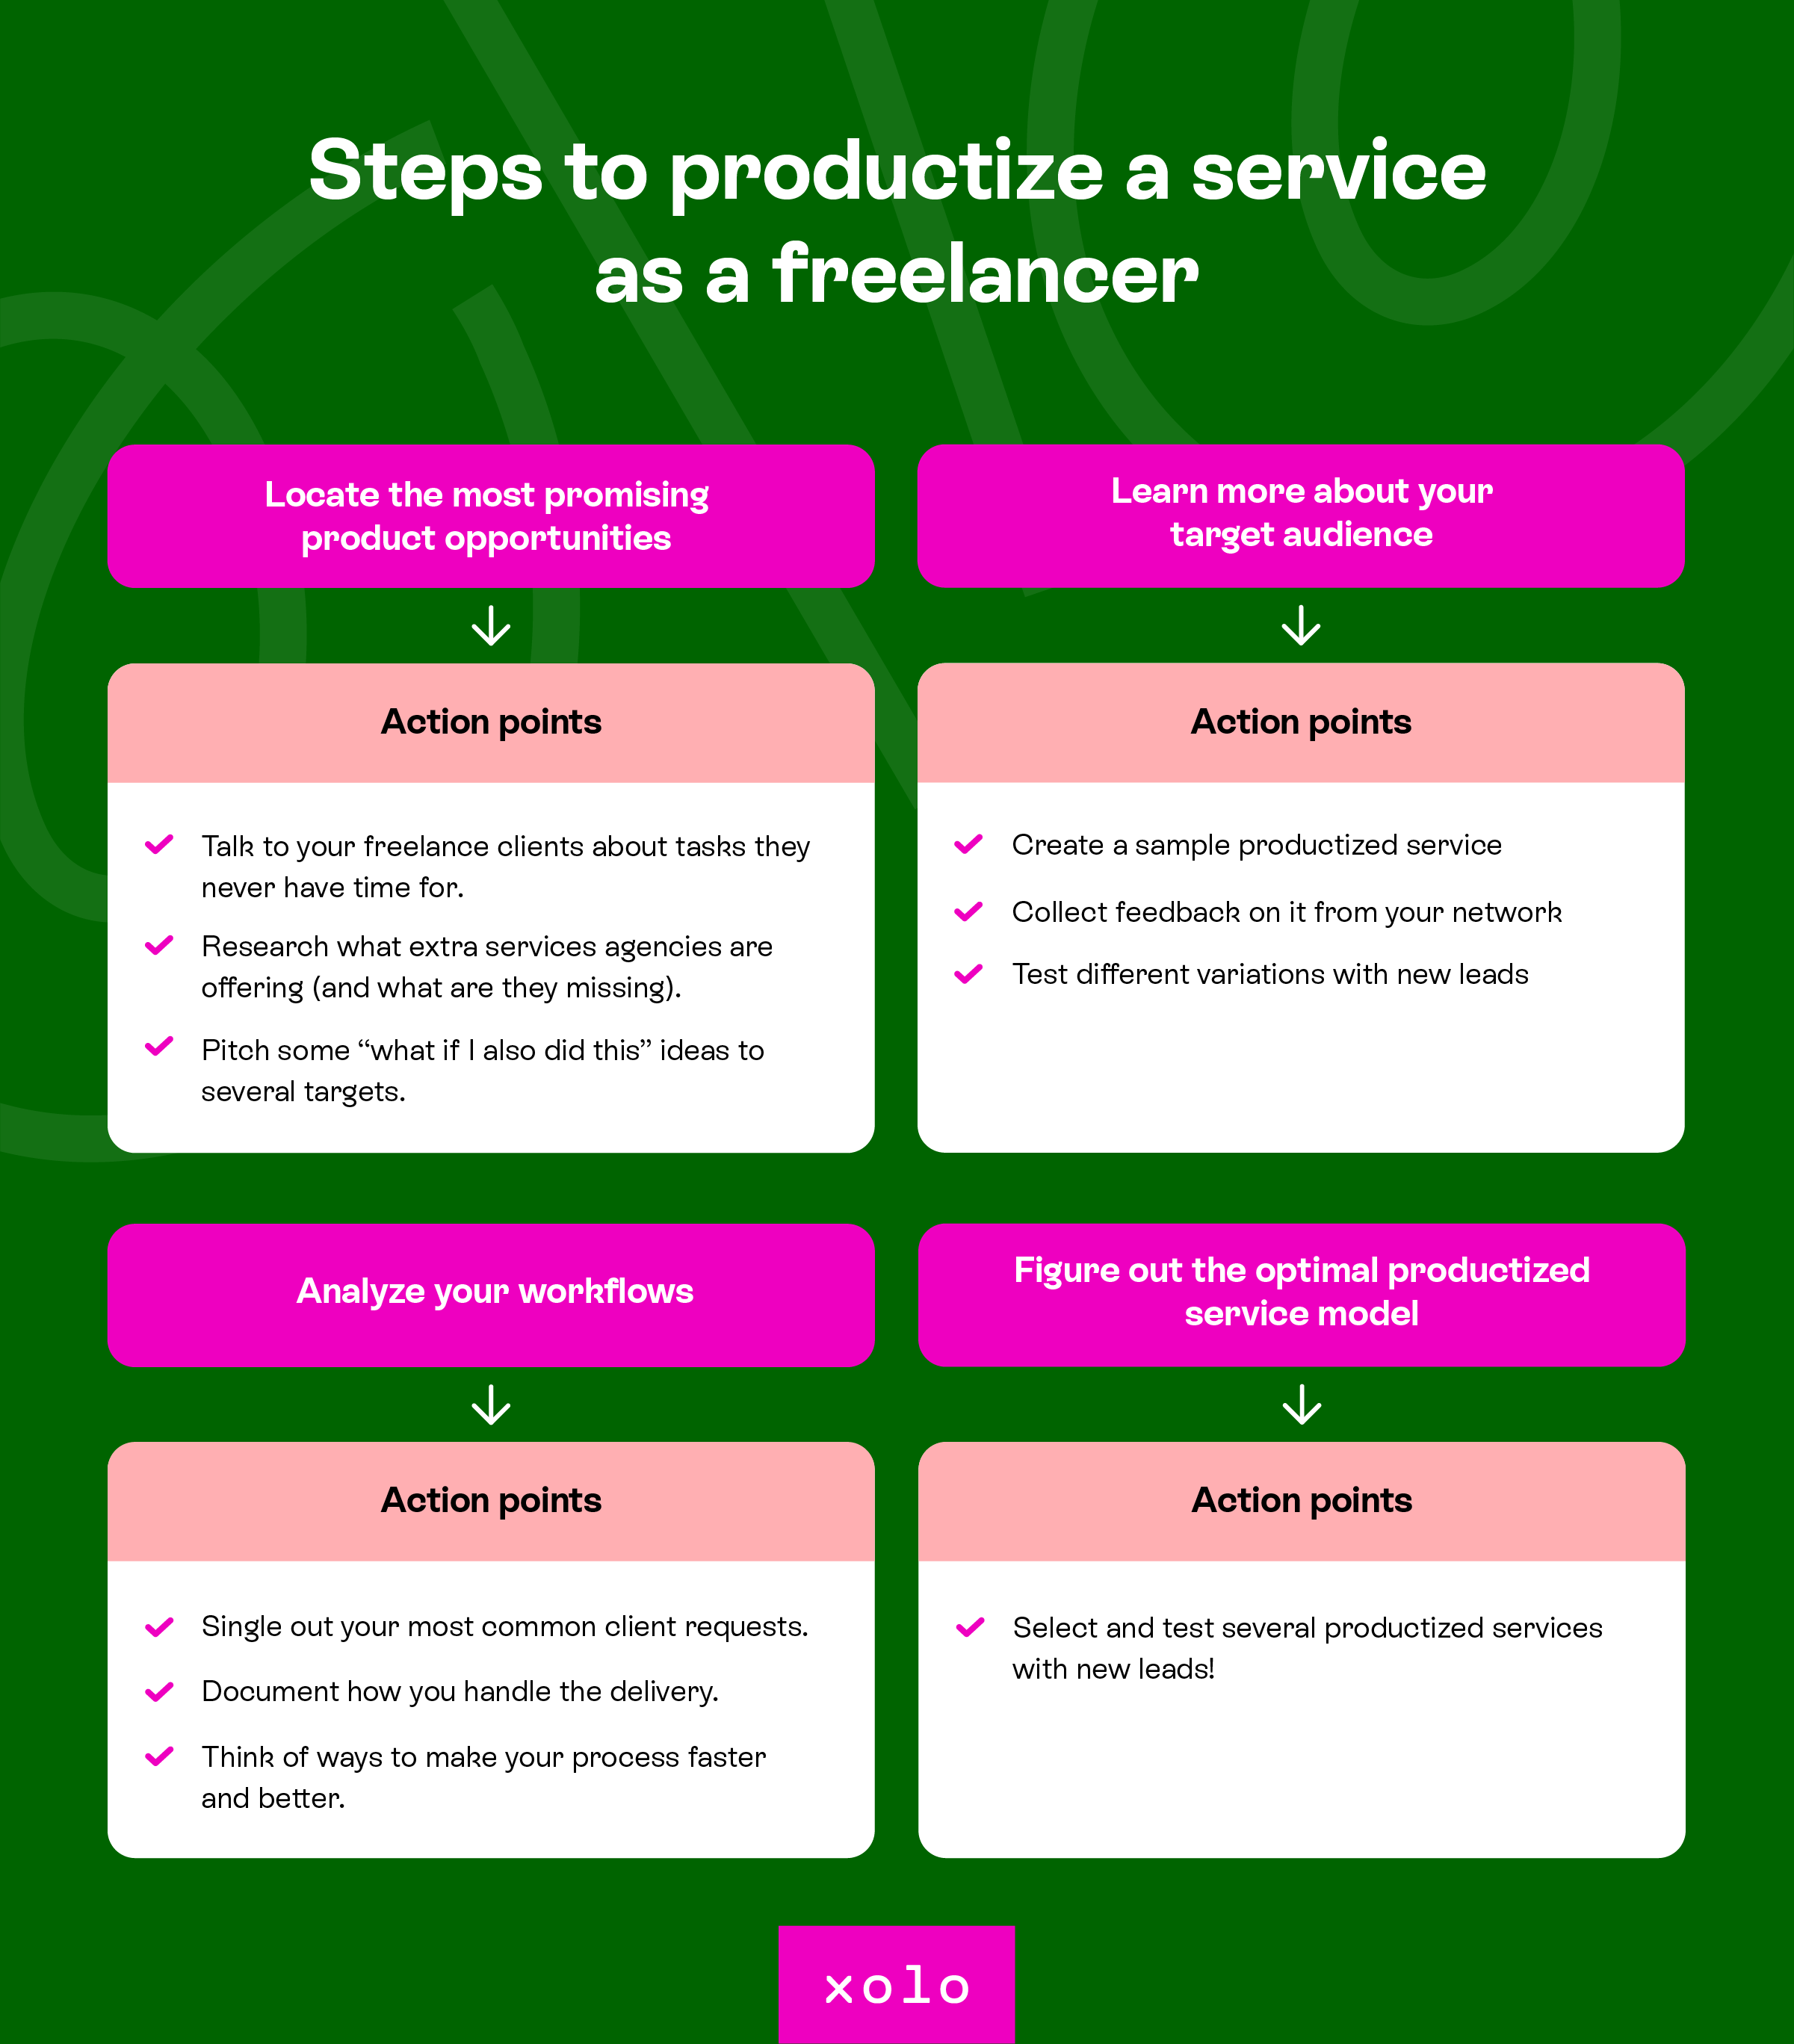 Steps to productize a service as a freelancer